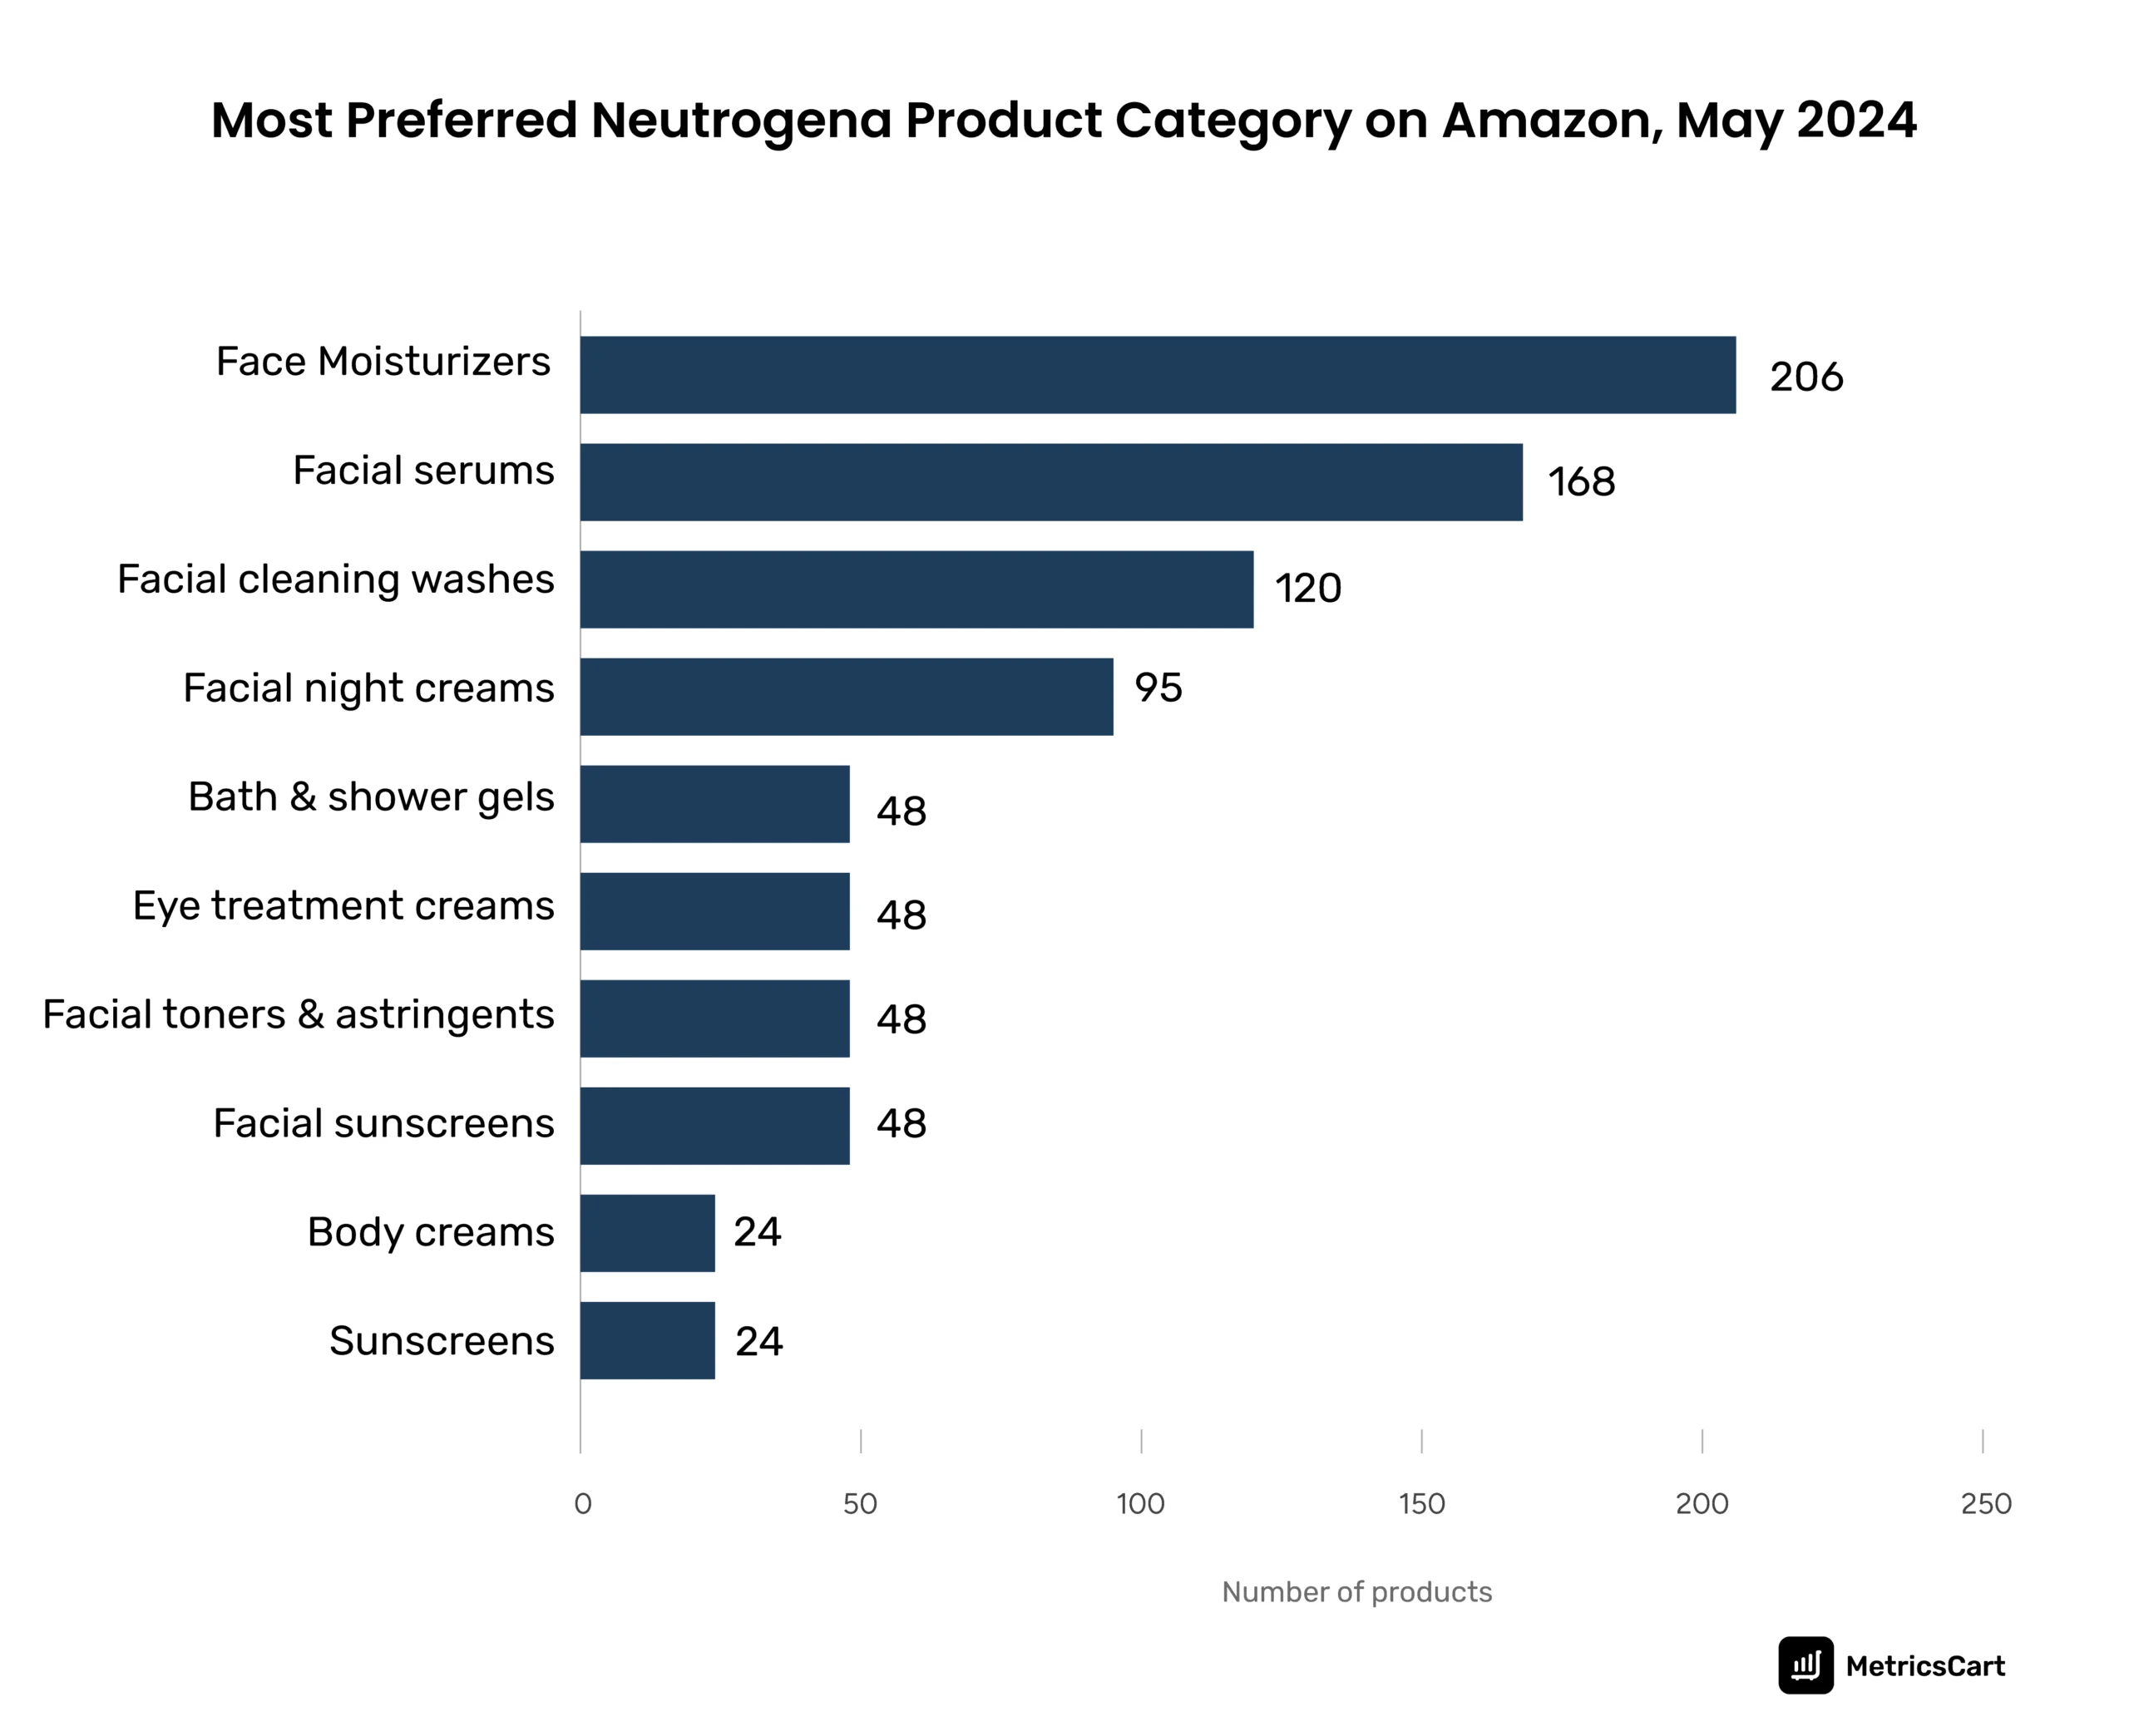 most preferred Neutrogena product category on Amazon for May 2024